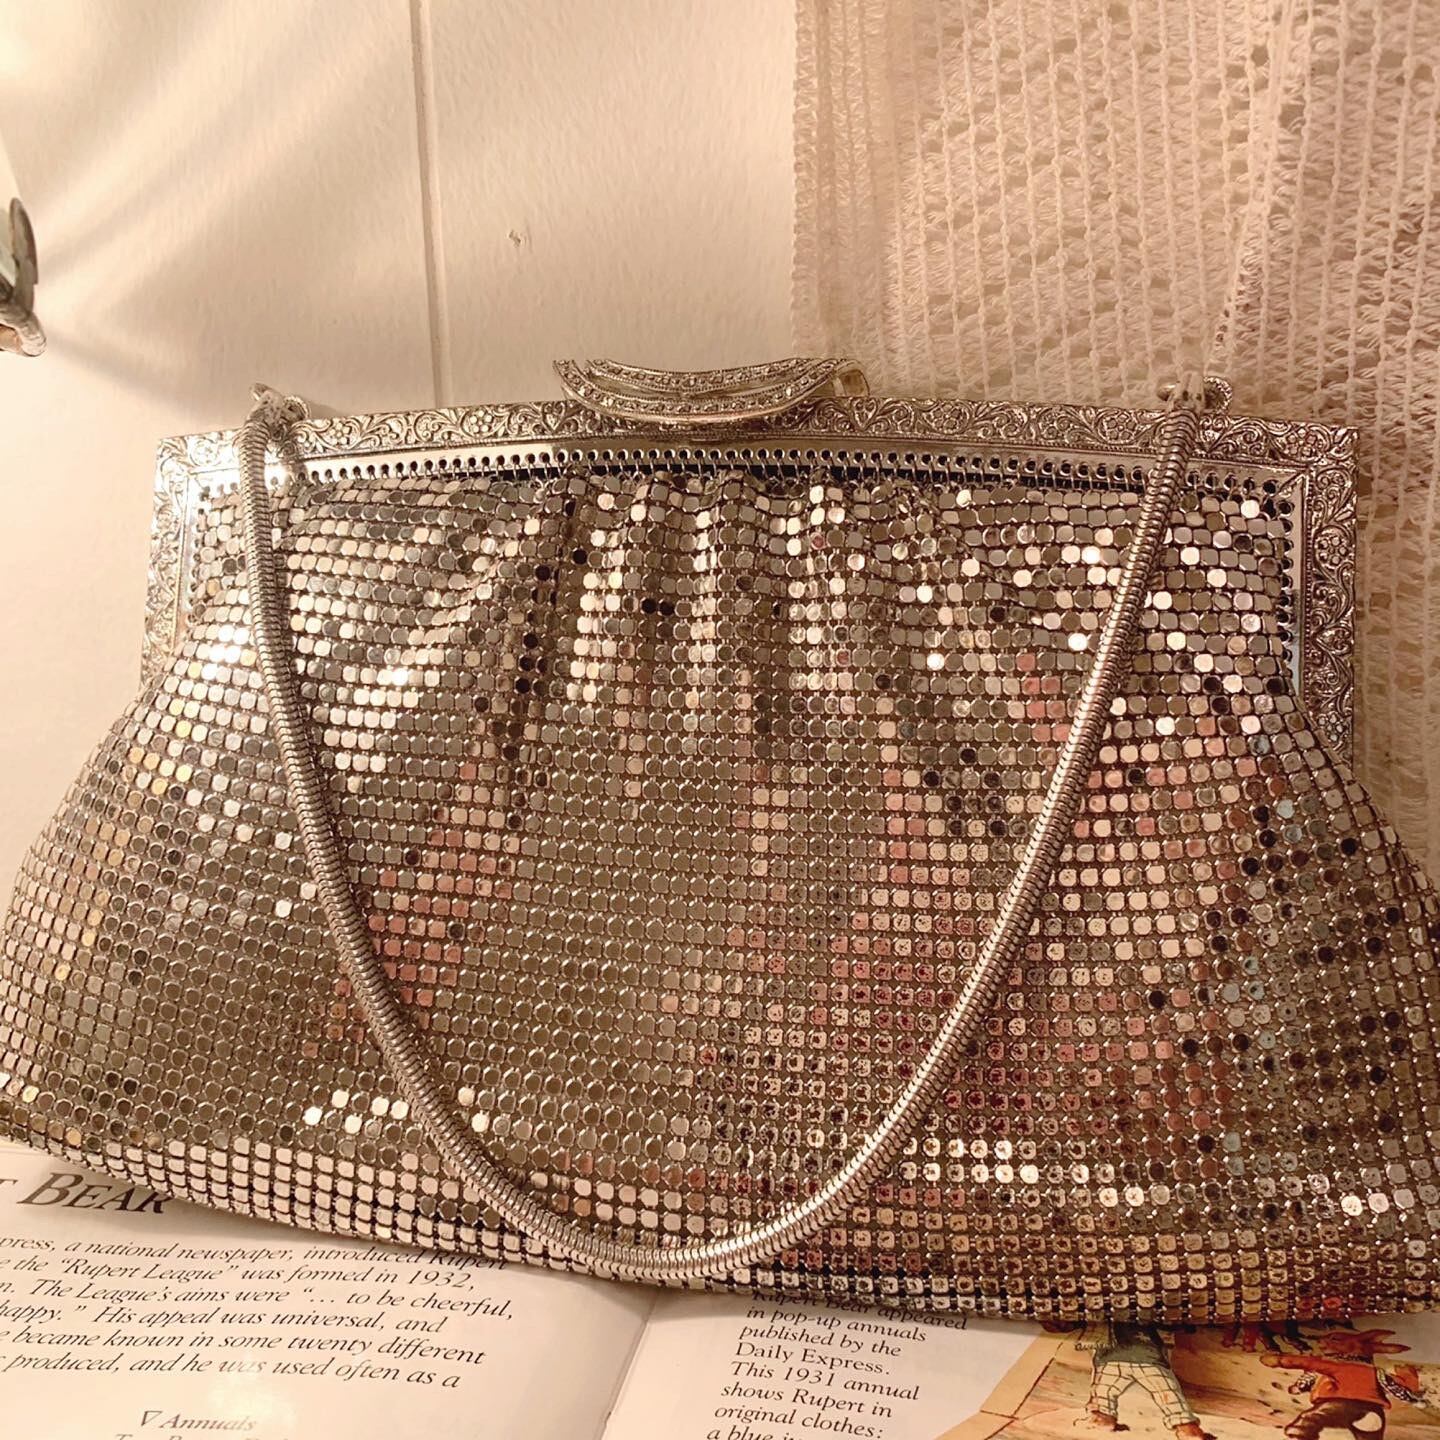 silver party bag / wallet type